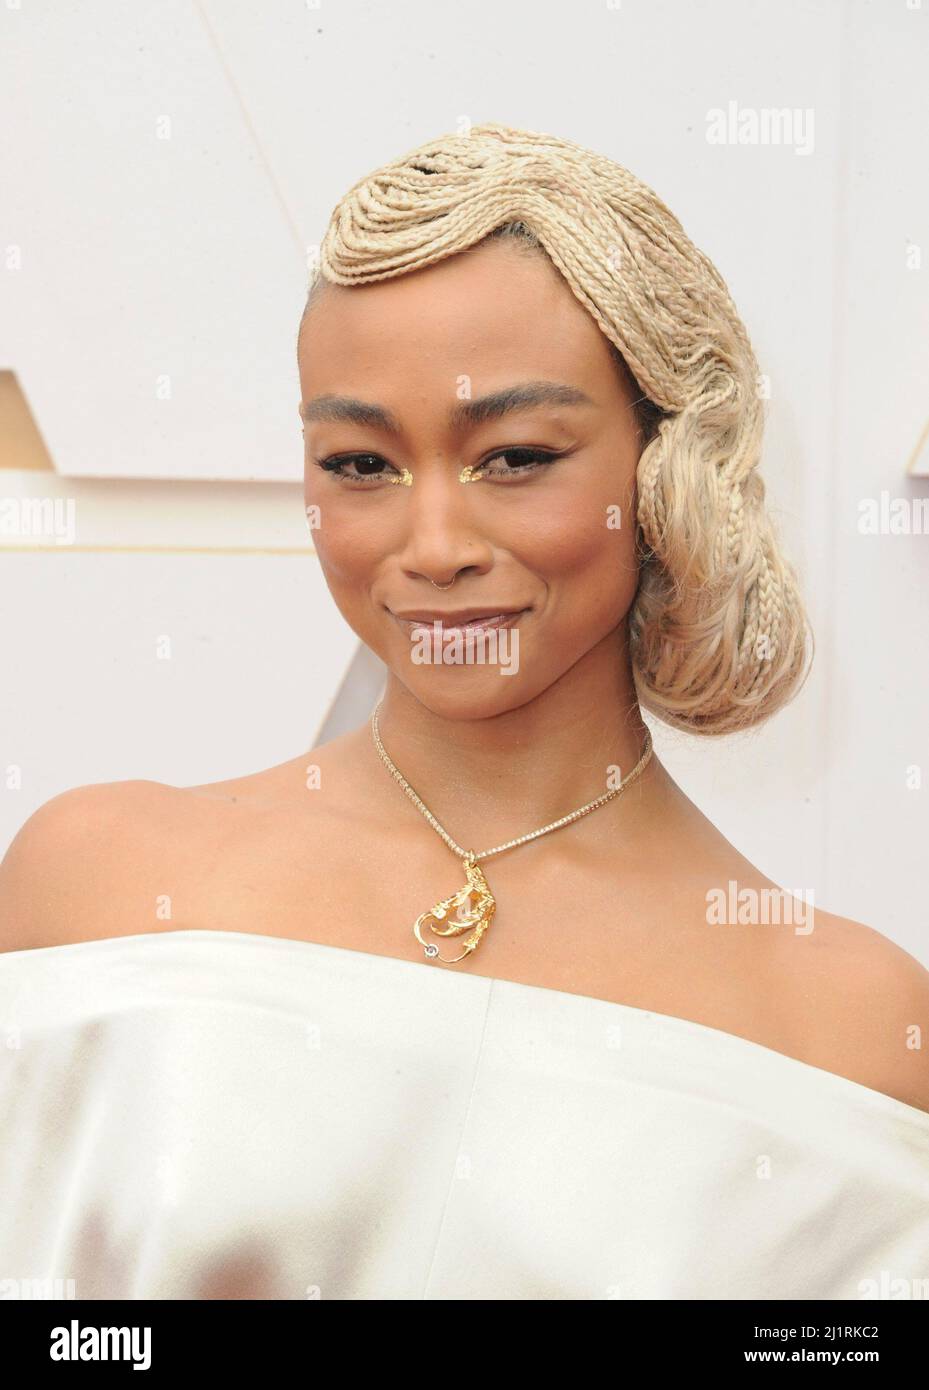 Los Angeles, CA. 27th Mar, 2022. Tati Gabrielle at arrivals for 94th Academy Awards - Arrivals 1, Dolby Theatre, Los Angeles, CA March 27, 2022. Credit: Elizabeth Goodenough/Everett Collection/Alamy Live News Stock Photo